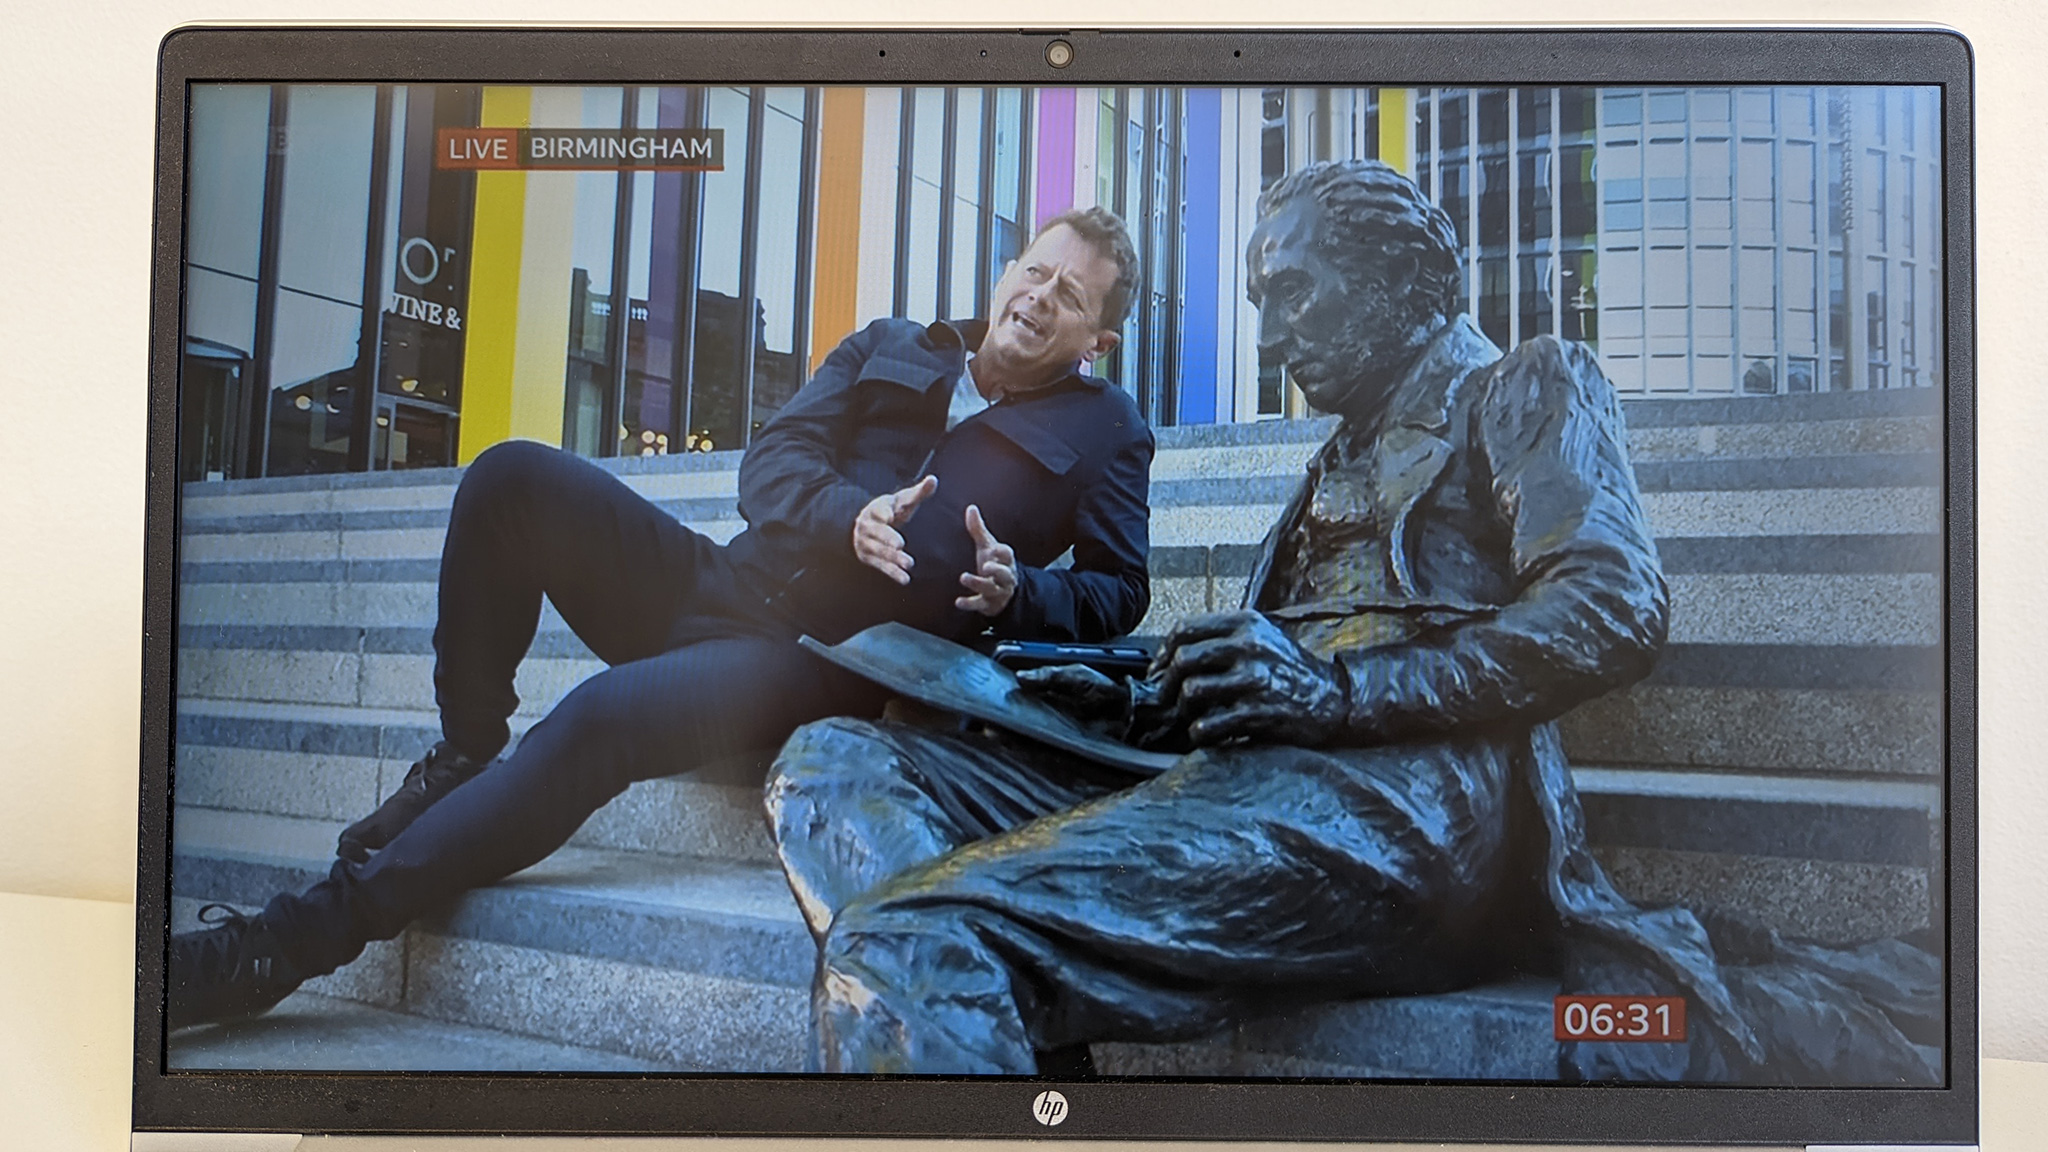 Mike Bushell, BBC reporter, sitting next to Thomas Attwood's statue in Chamberlain Square.